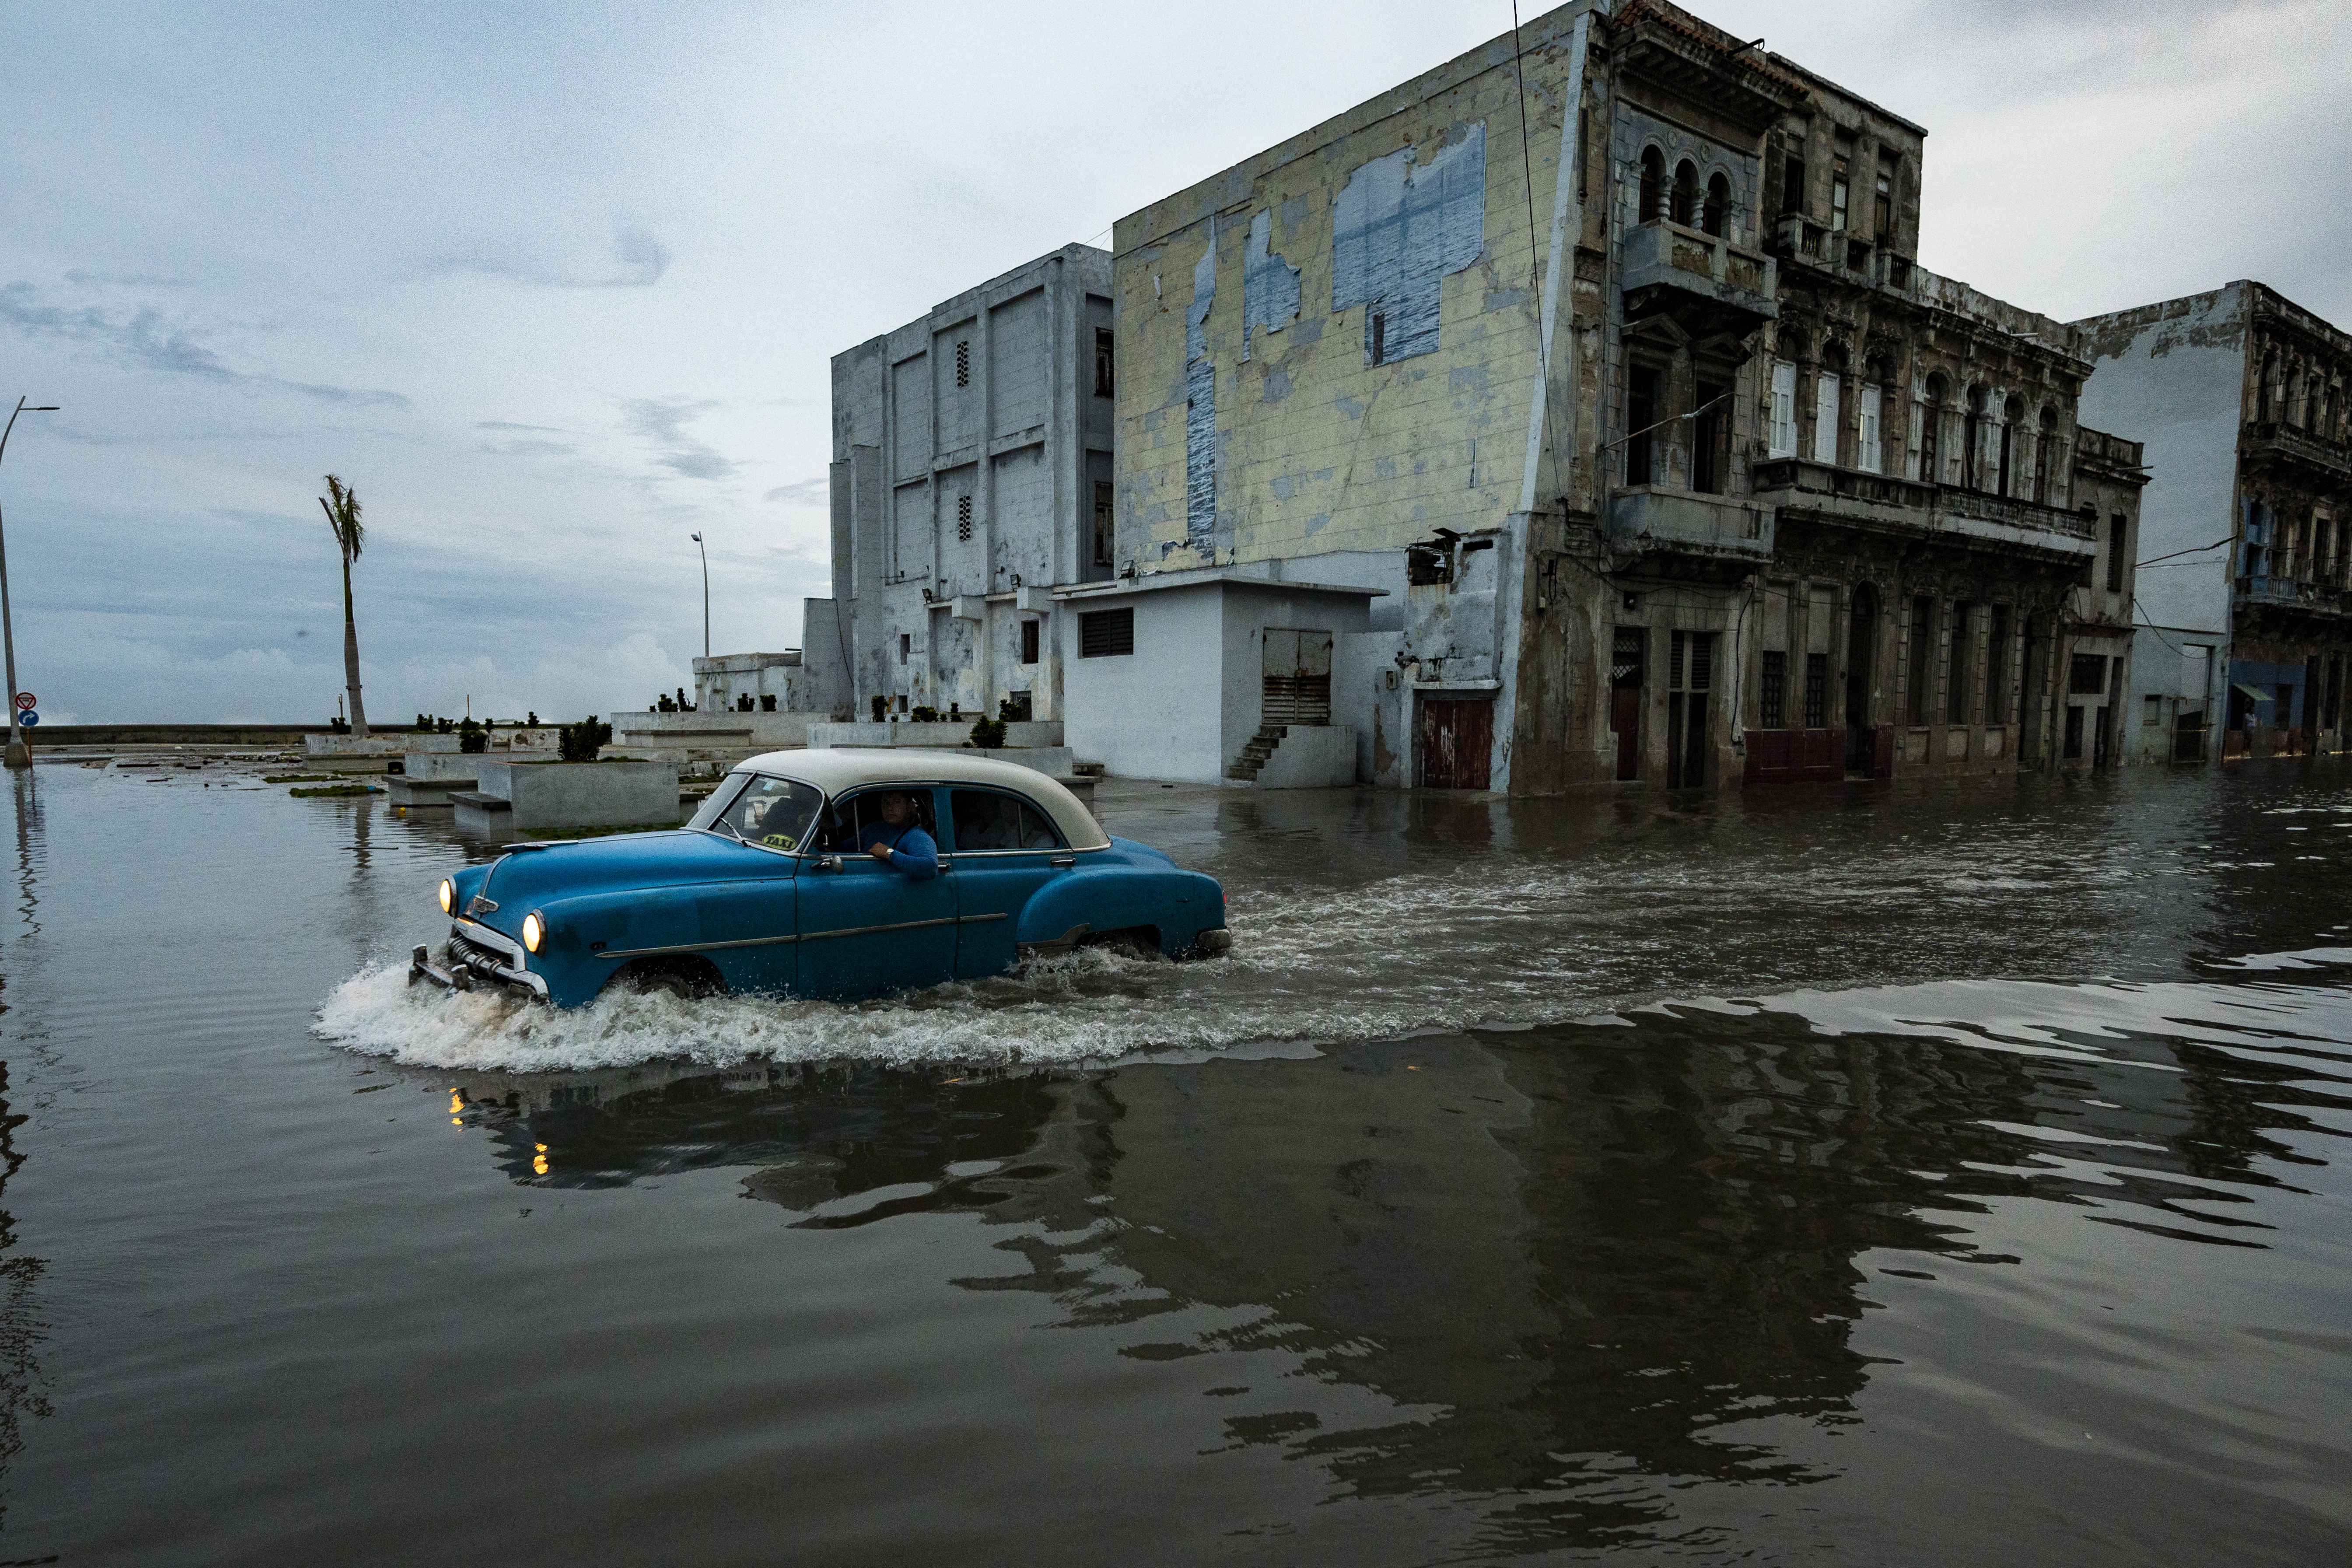 An old American car drives through a flooded street in Havana on September 28, 2022, after the passage of Hurricane Ian.  - Cuba crossed 12 hours this Wednesday "Zero power generation" After the passage of the powerful Cyclone Ian, due to failures in the National Electricity System (SEN) connections.  (Photo by Yamil Laj/AFP)